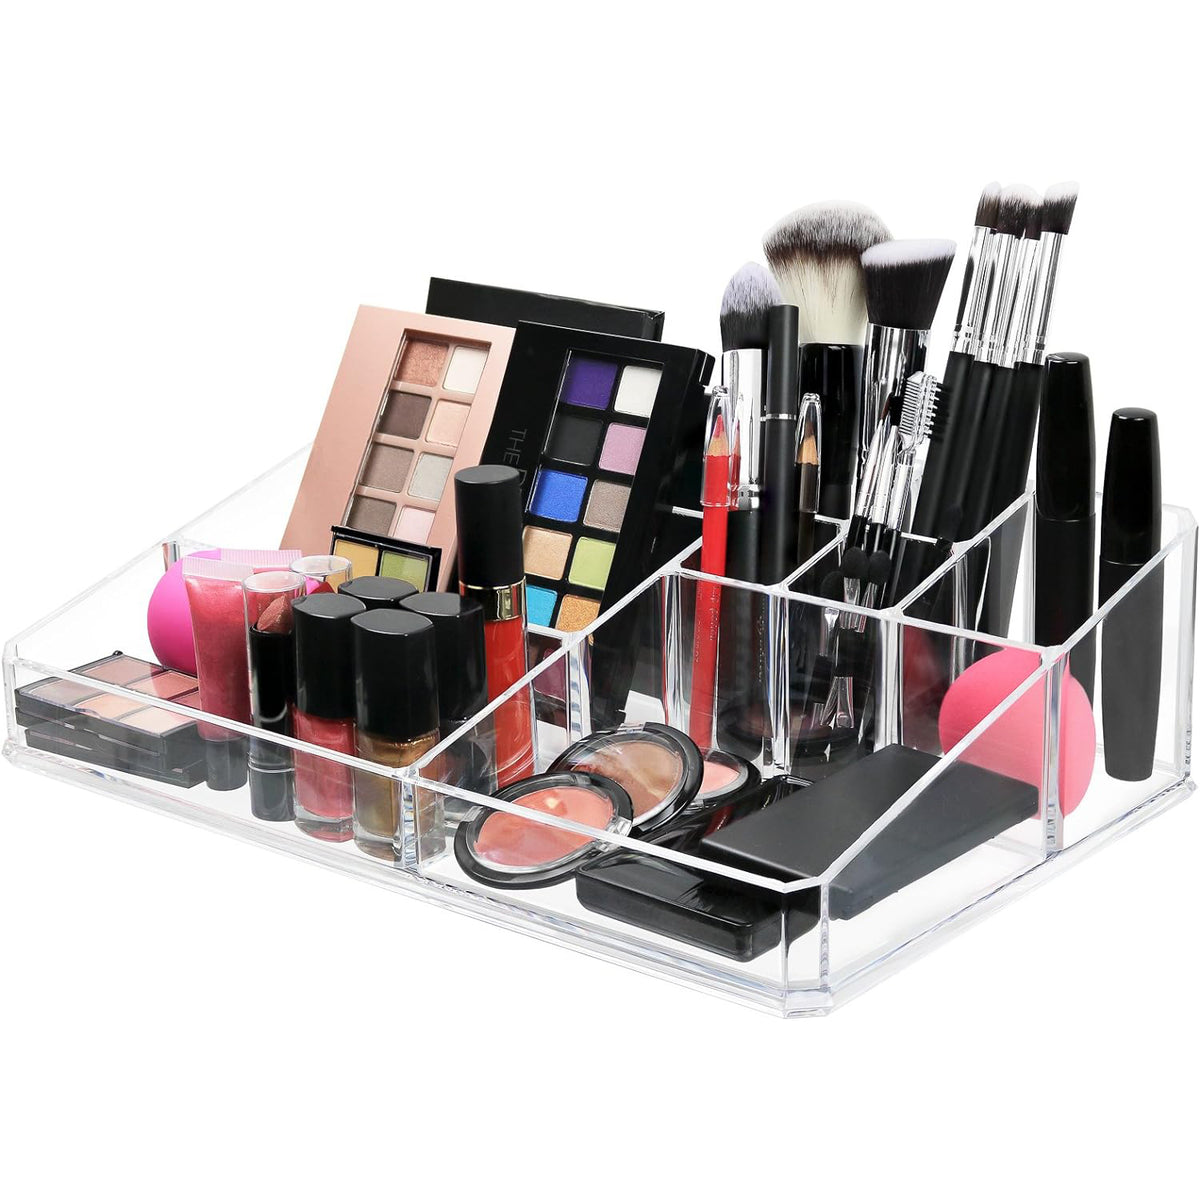 9 Compartment Acrylic Storage Organizer, Clear - For Makeup Or Beauty Essentials